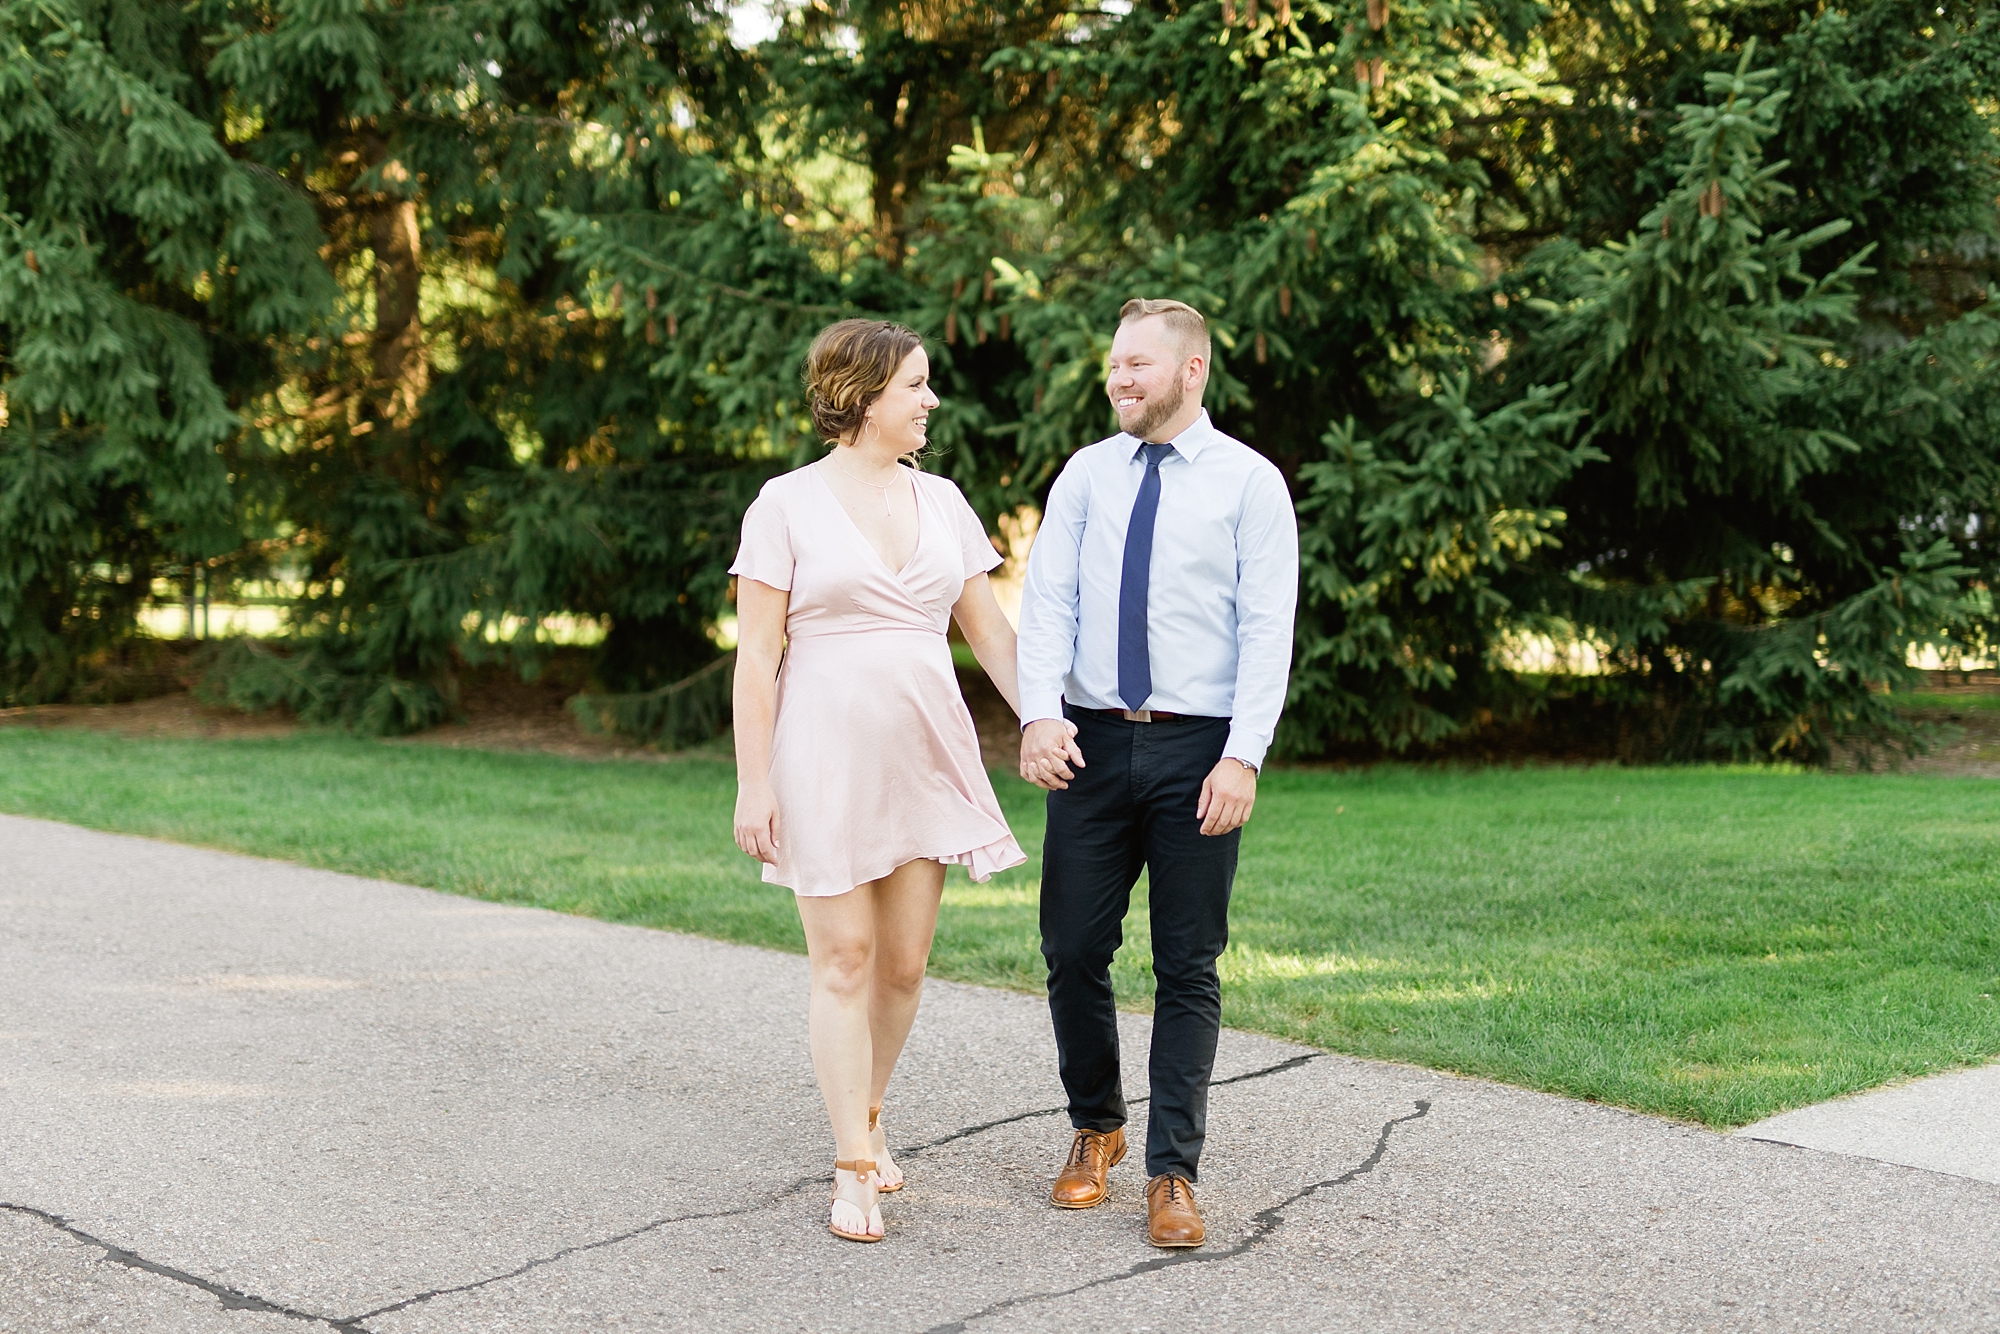 A summer golden hour engagement session at George George Park in Metro Detroit, Michigan by Breanne Rochelle Photography.